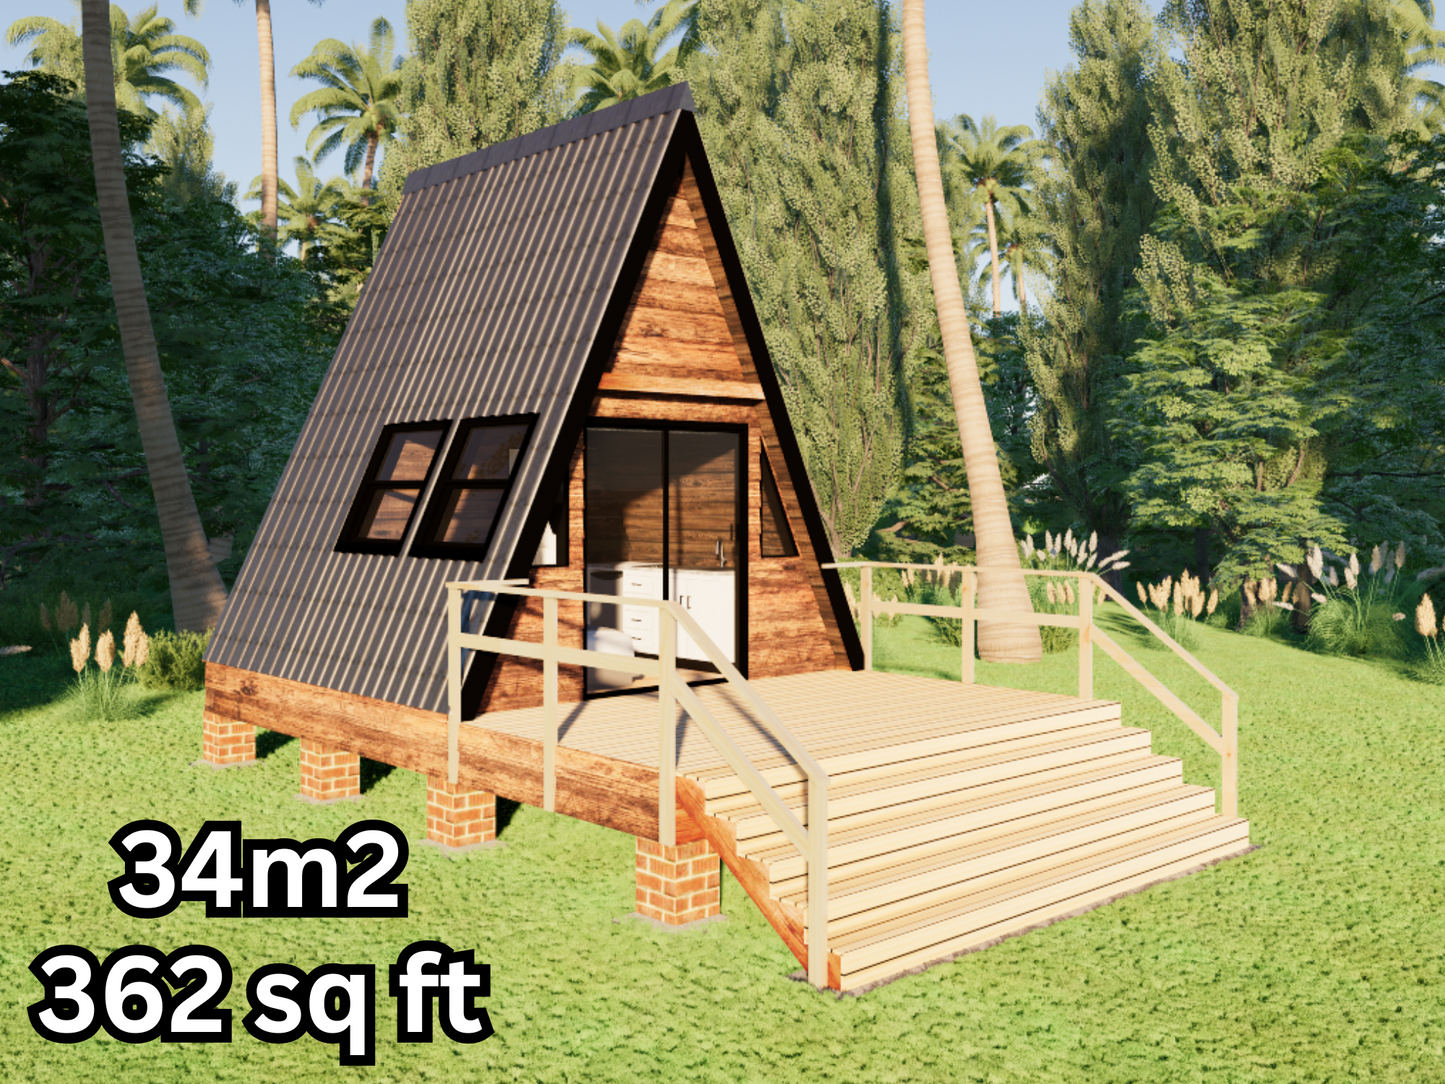 Tiny A-Frame Cabin - 34m2 (362 sq ft)